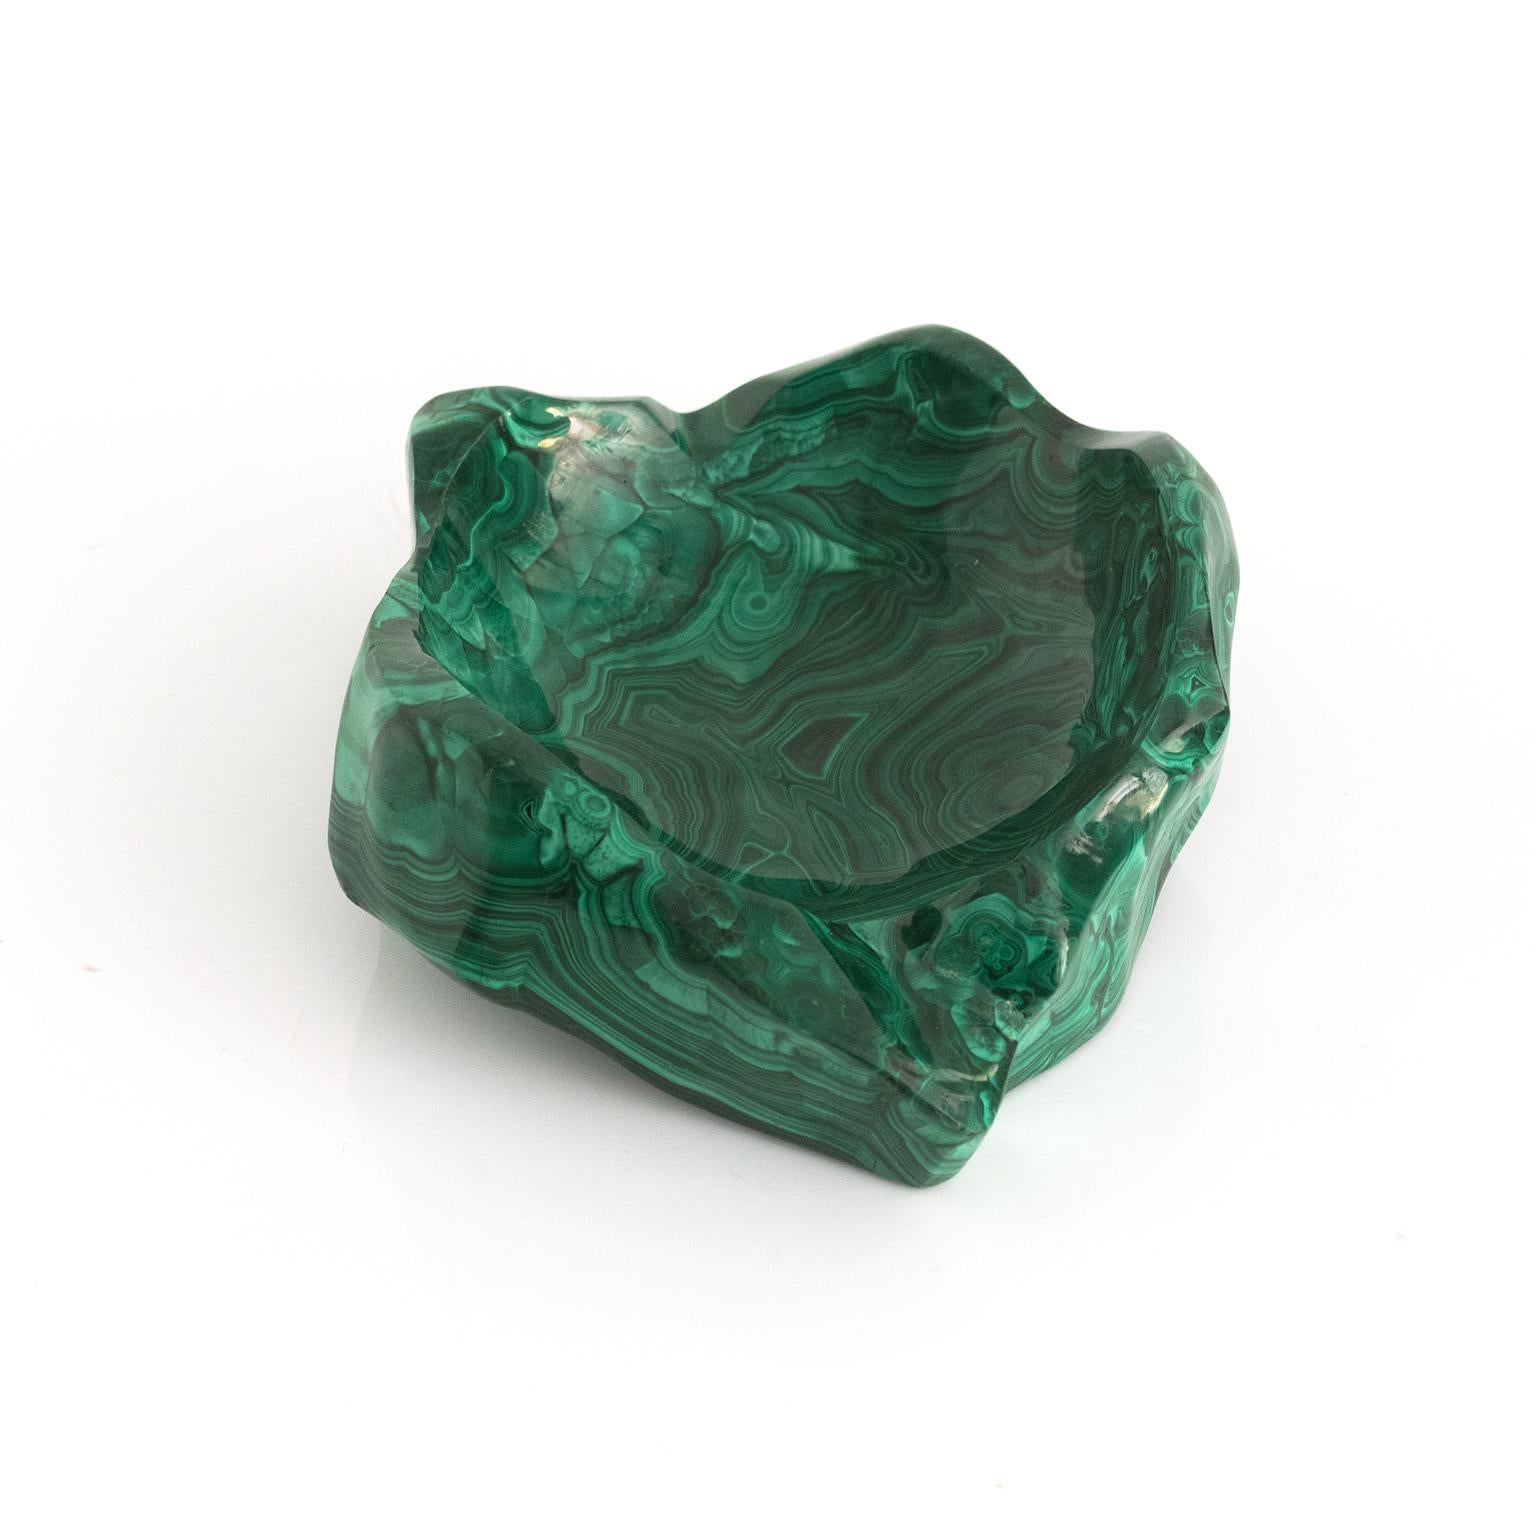 European Carve Stone Bowl Made from a Single Piece of Malachite For Sale